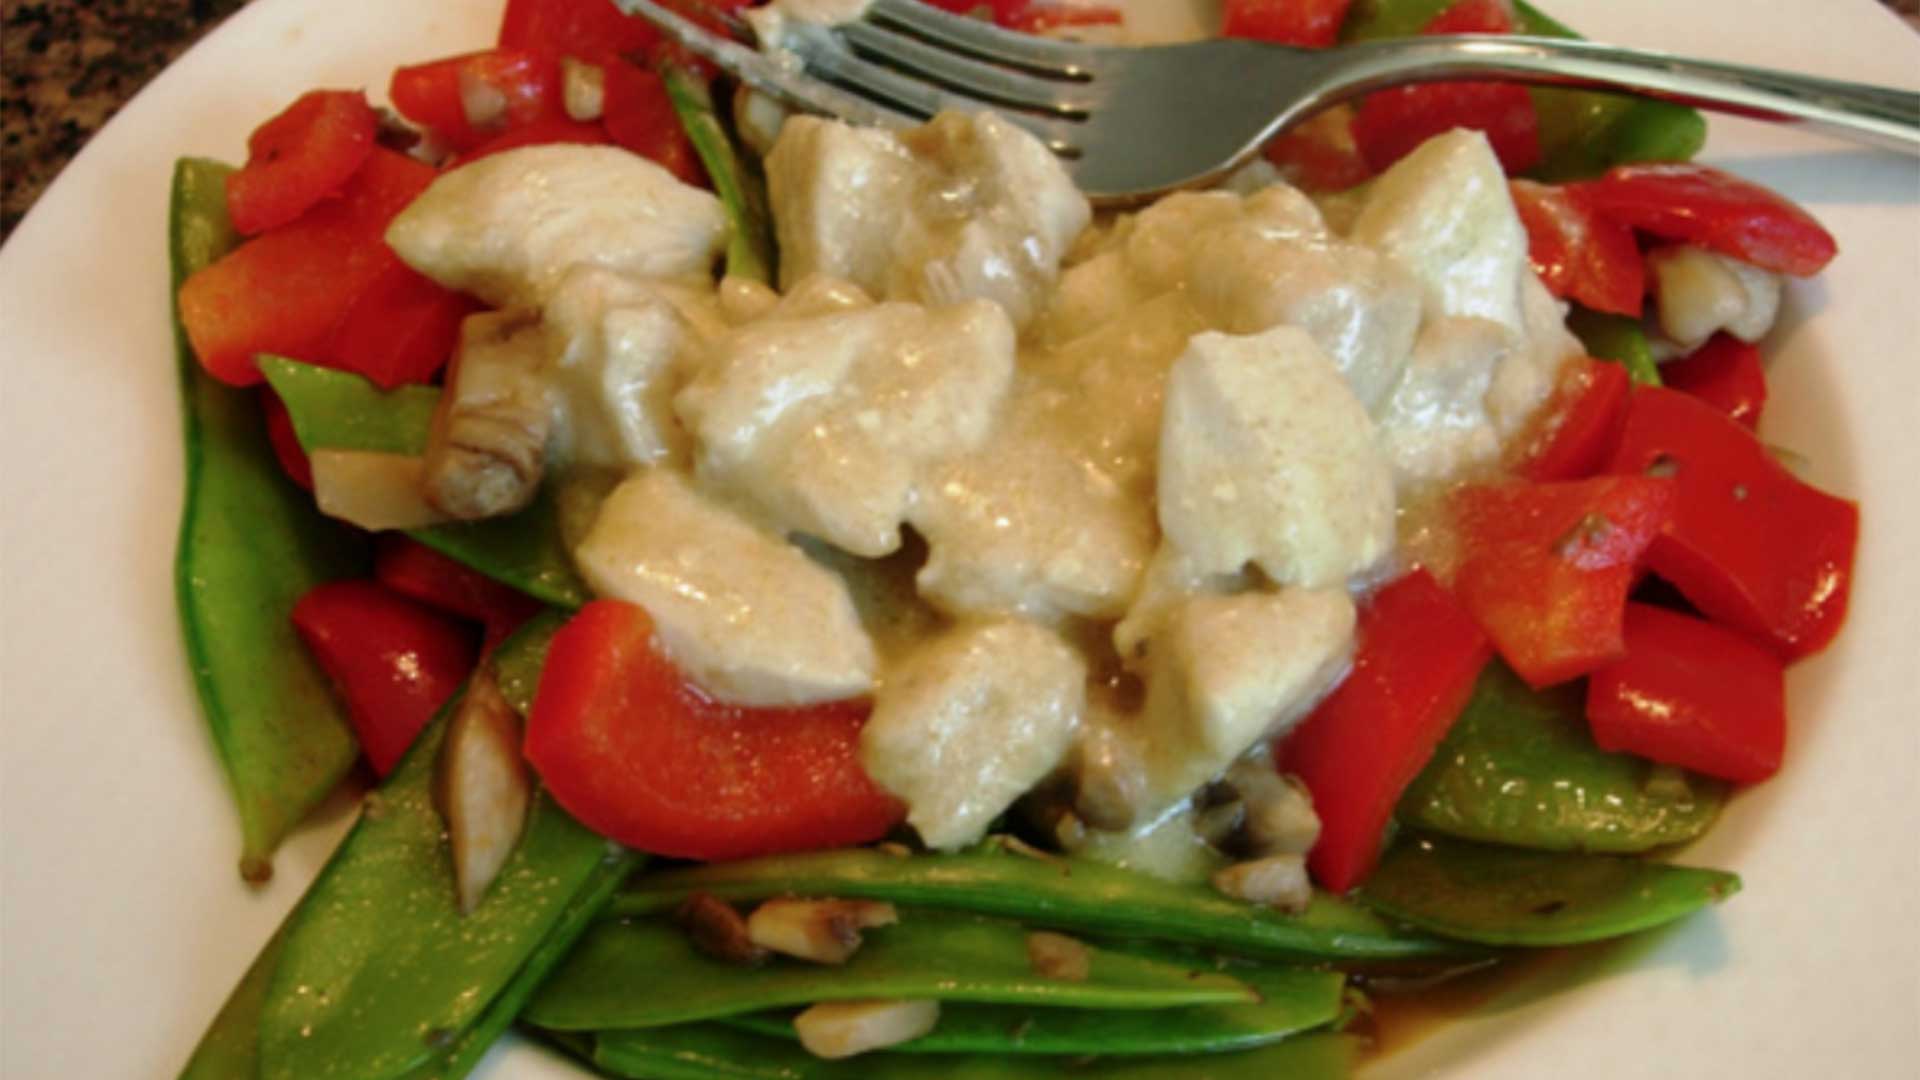 curried chicken with mangetout and red bell pepper